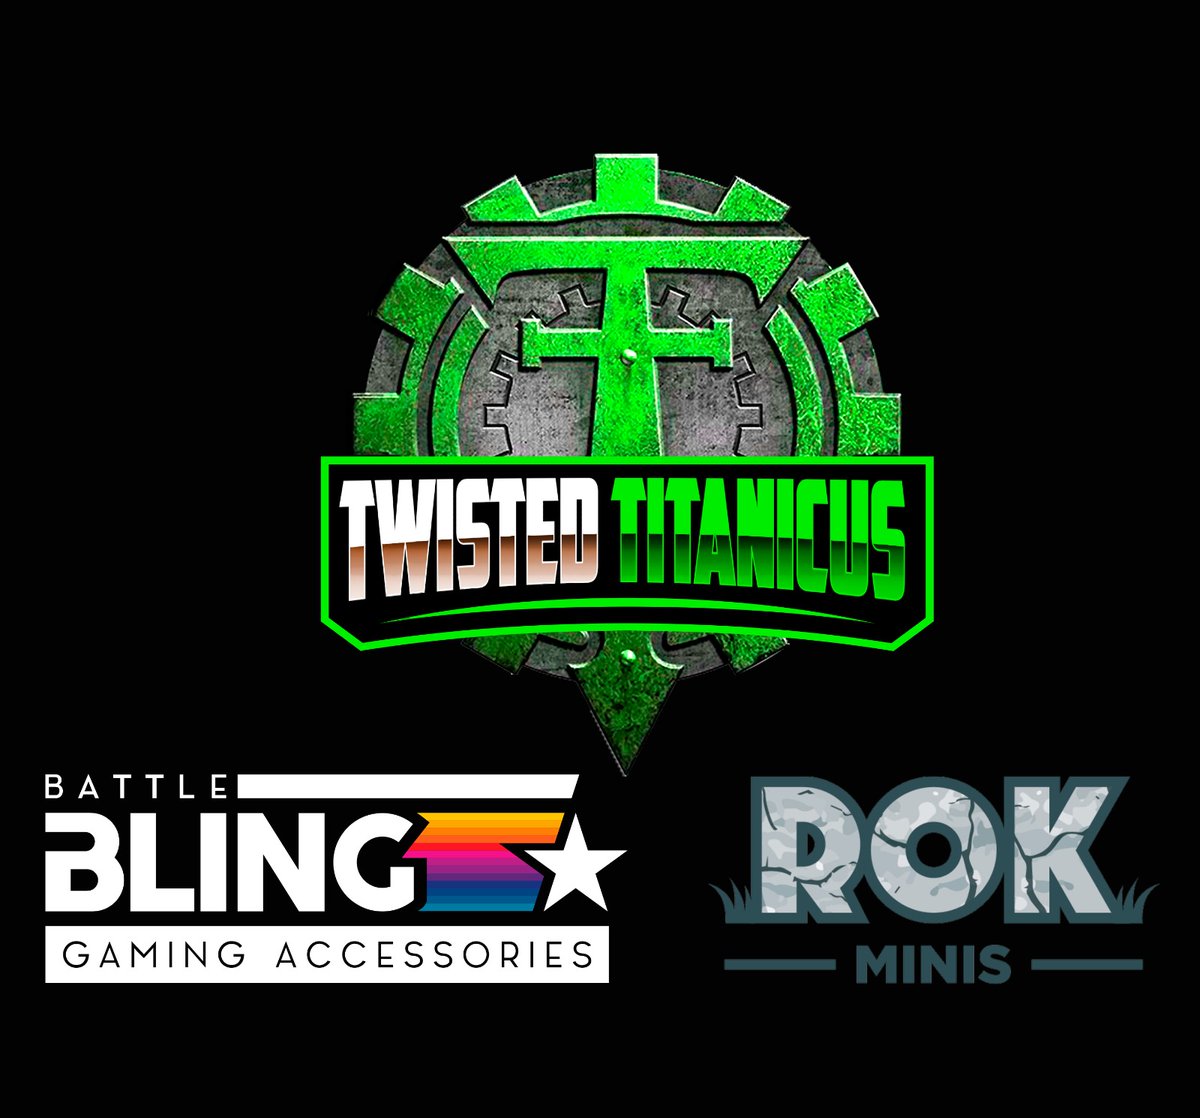 Big news today, we're pleased to announce that @rok_minis & #battlebling are now official sponsors of our #EpicScale events. This means awesome prize & showpiece terrain coming your way very soon!

#AdeptusTitanicus #LegionsImperialis #AeronauticaImperialis #HorusHeresy